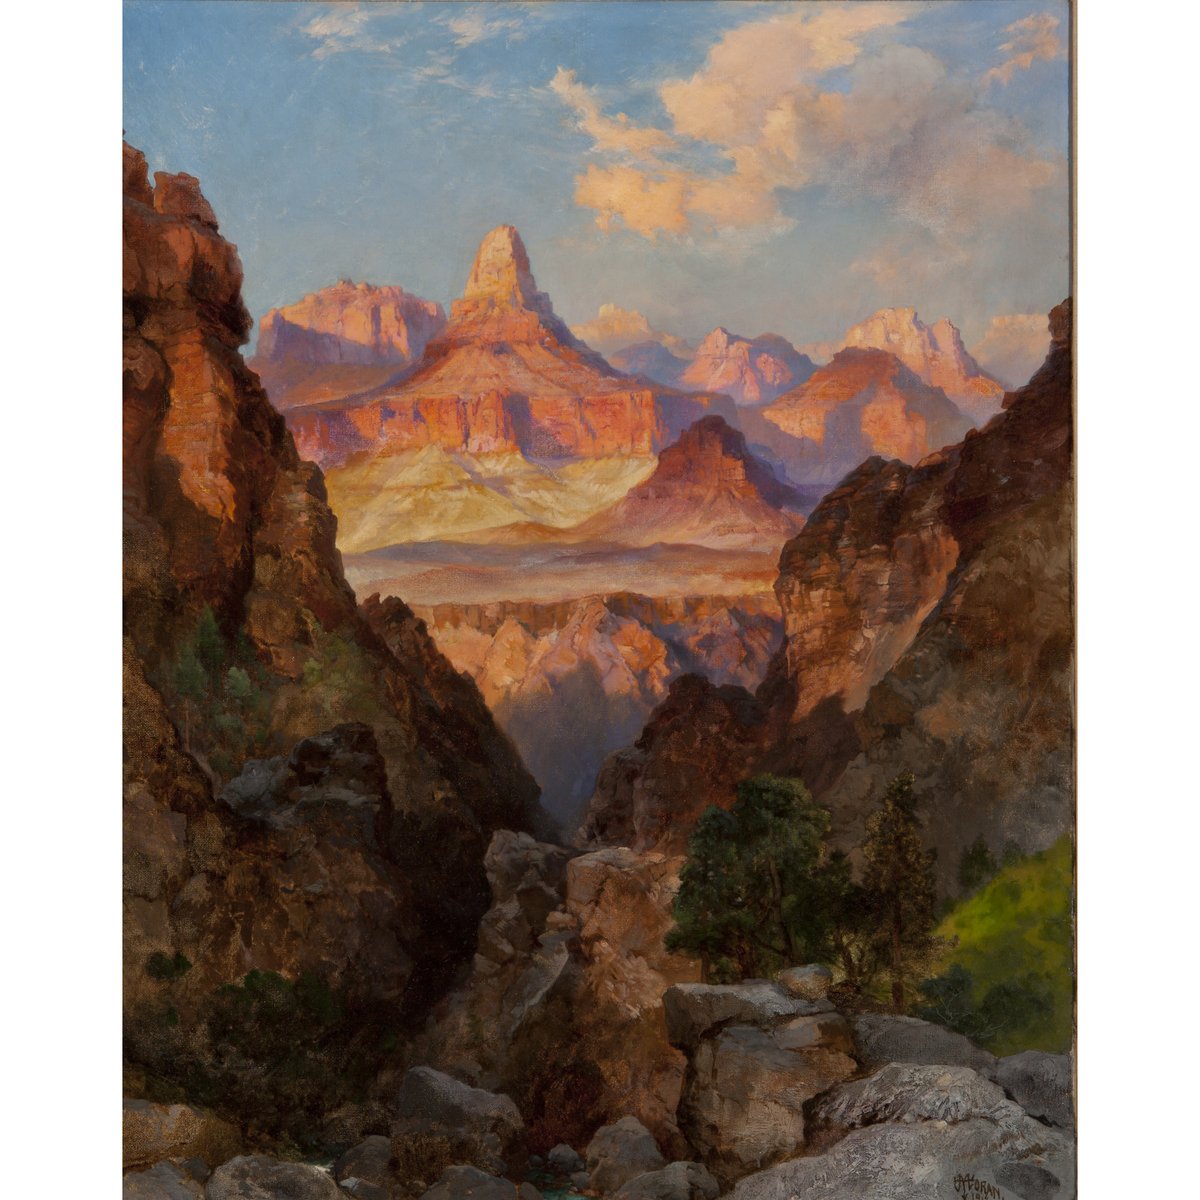 'Of all places on Earth, the great Canyon of Arizona is the most inspiring in its pictorial possibilities.' 🌄🌵📍See Thomas Moran's Zoroaster Temple at Sunrise (1916) on view now. #ThomasMoran #AmericanArt #WesternArt #SouthwestArt #GrandCanyon